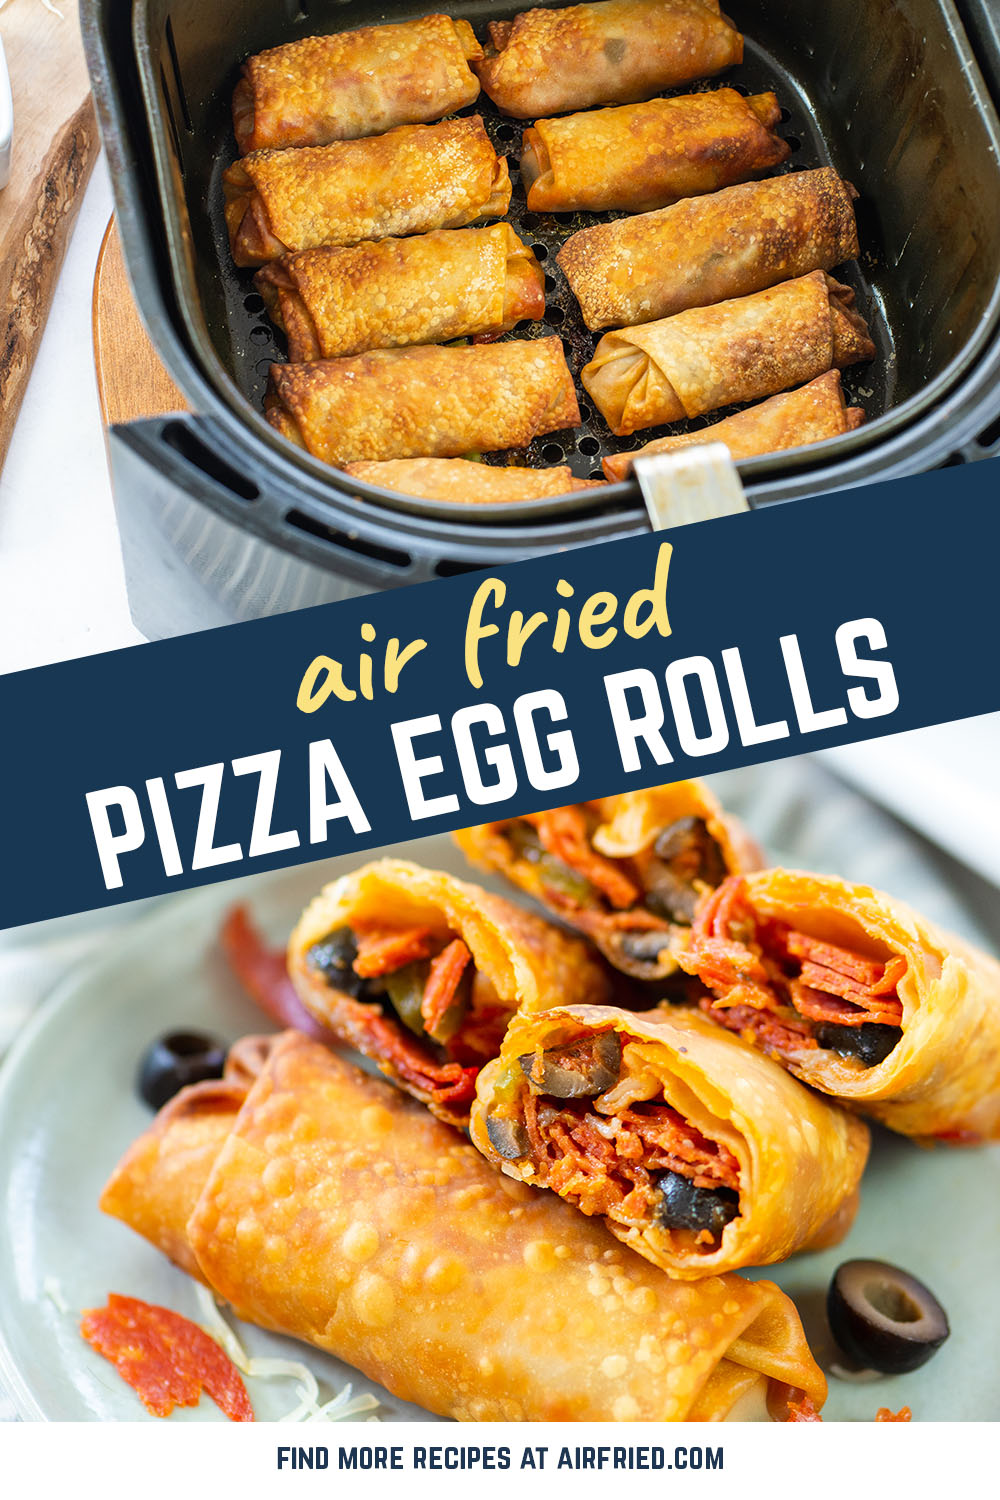 Thesee air fried pizza egg rolls took just 7 minutes to cook!  Add a couple minutes for the filling and you are chowing down on these guys in just 10 minutes total!